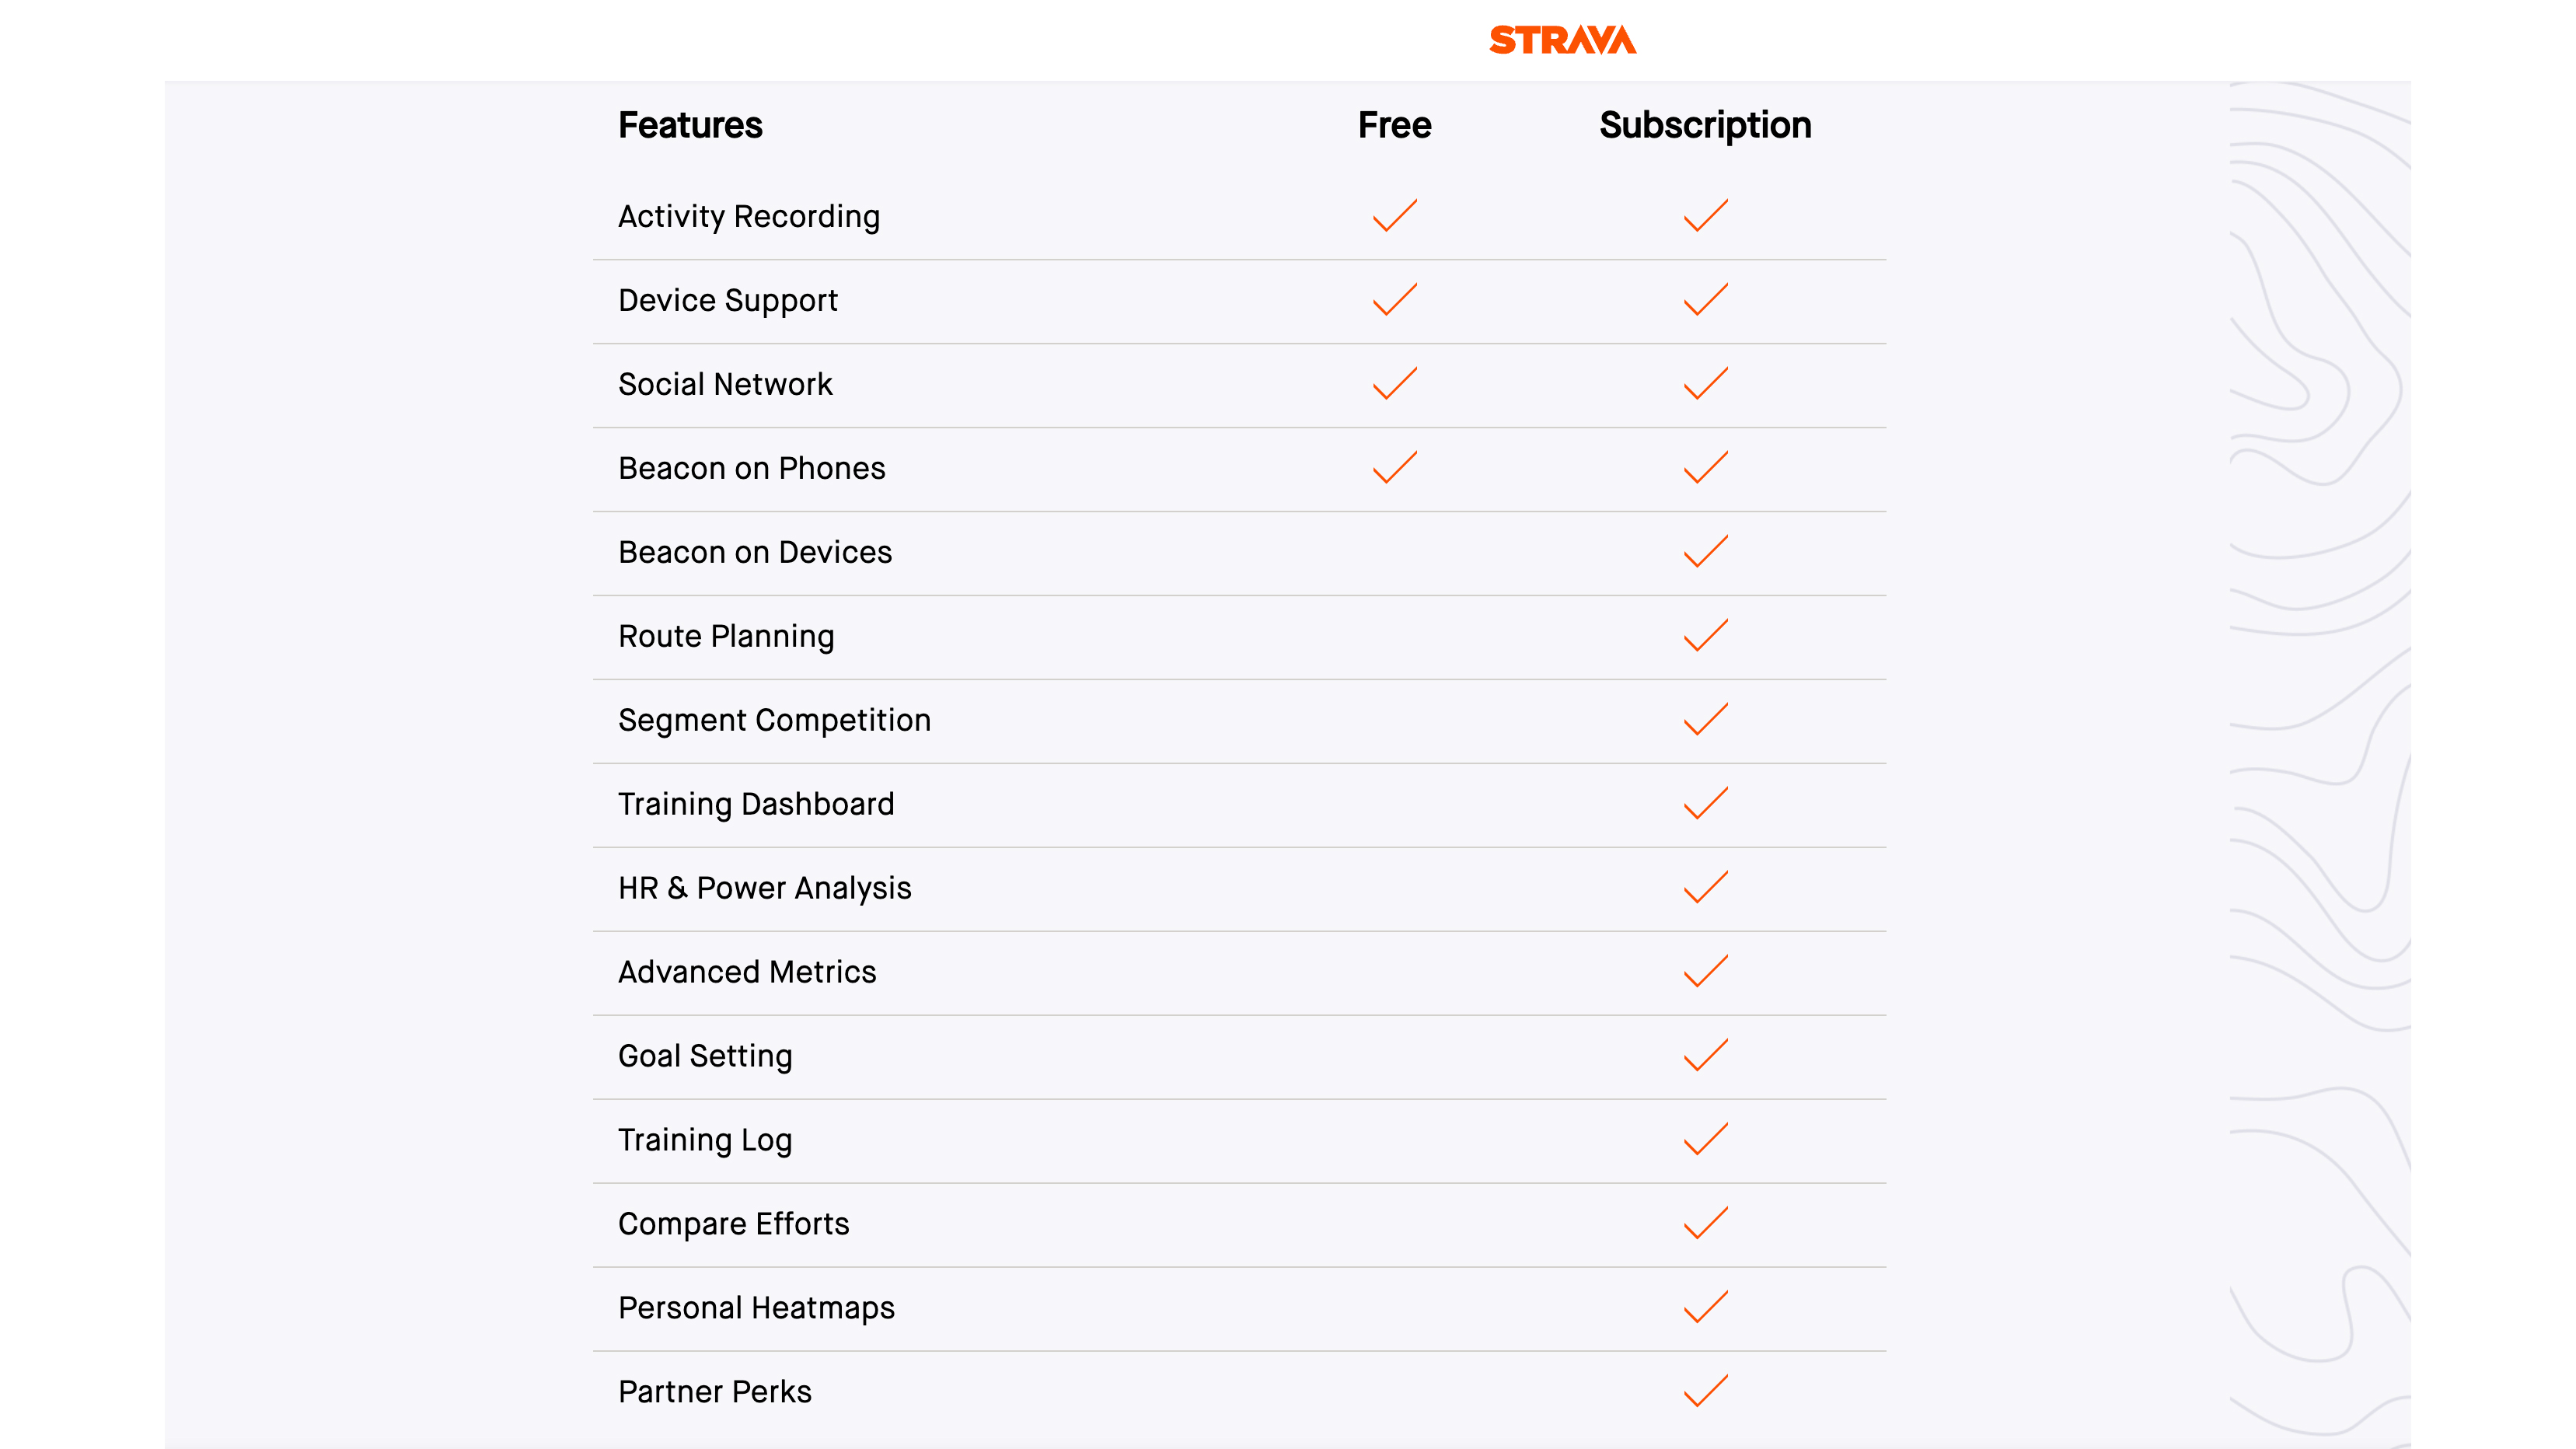 The features you get with a free or paid version of Strava